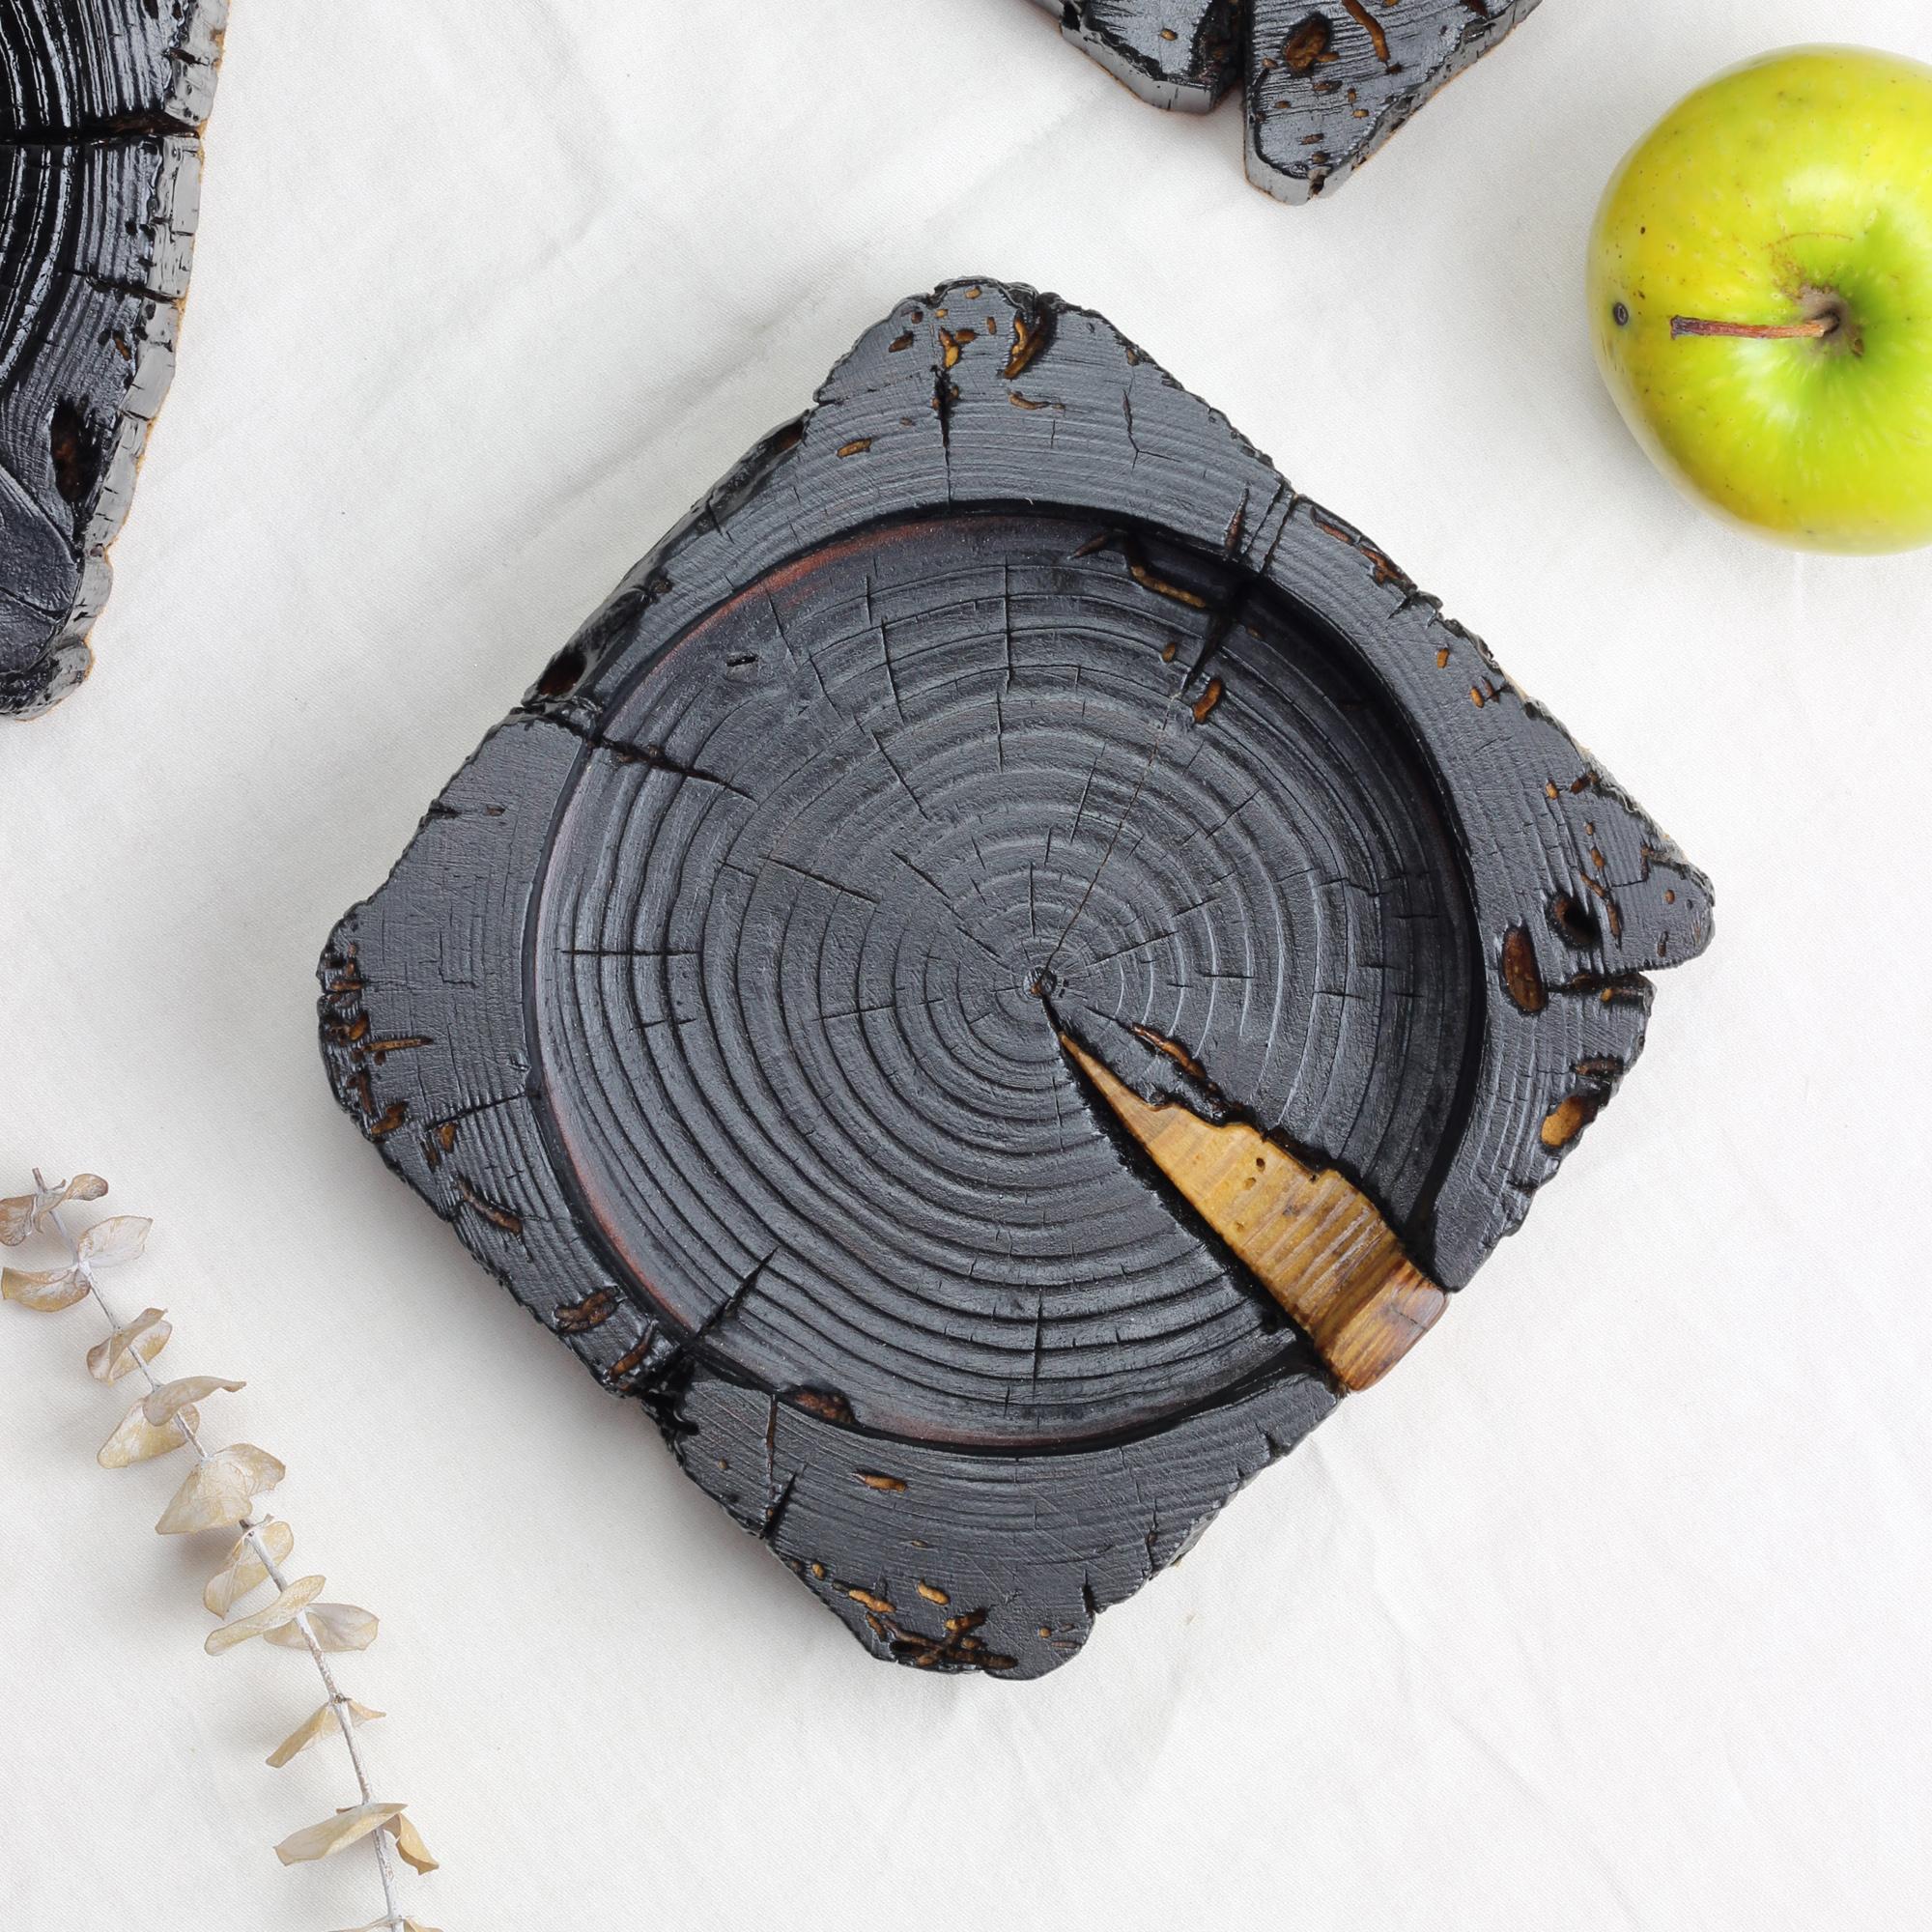 Elegantly crafted, these wooden trays—ideal for jewelry or as desk organizers—are fashioned from timeworn barn beam wood. They undergo the traditional Japanese Yakisugi burning technique and are meticulously treated with natural oils, then